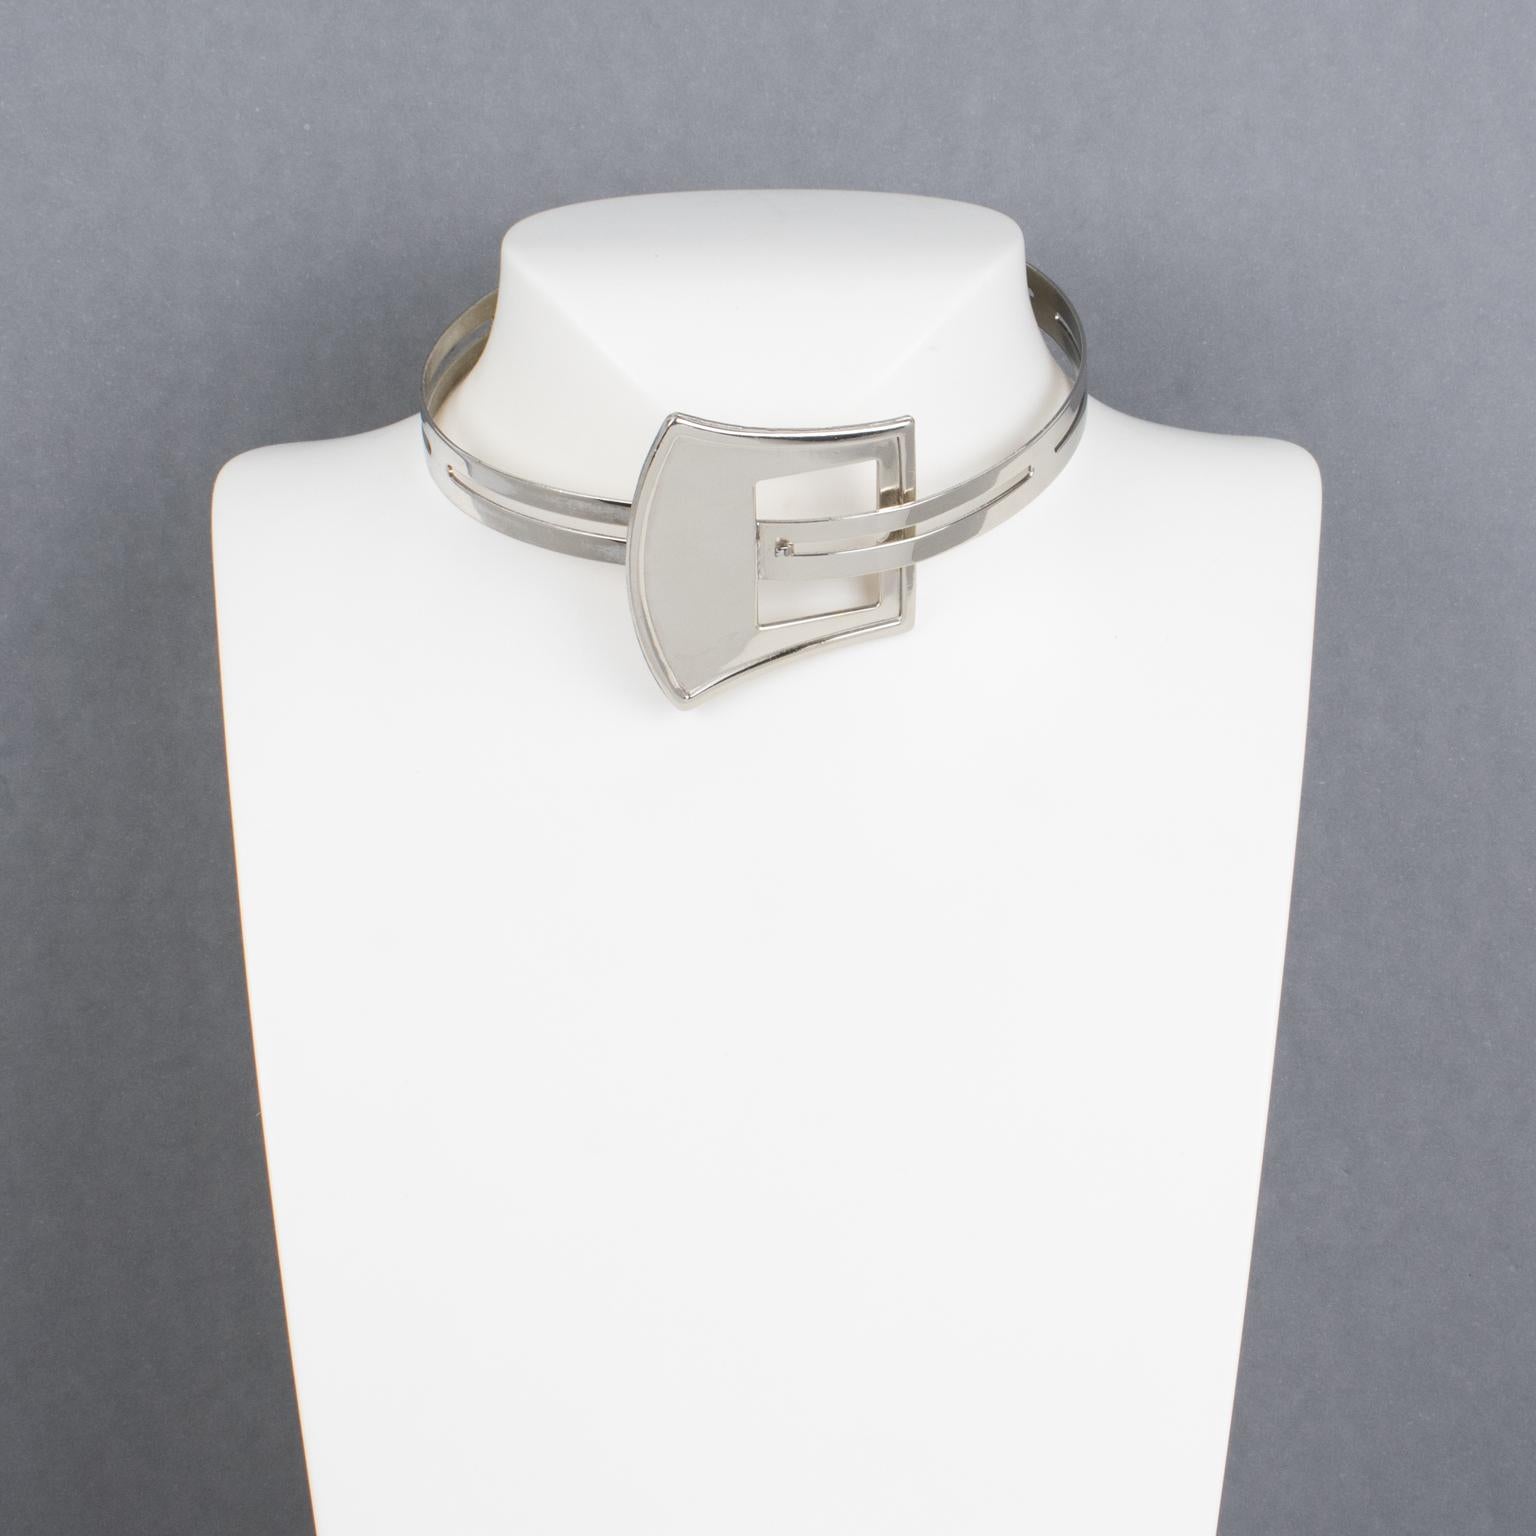 Modernist Silvered Metal Rigid Collar Necklace with Belt Buckle Design In Good Condition For Sale In Atlanta, GA